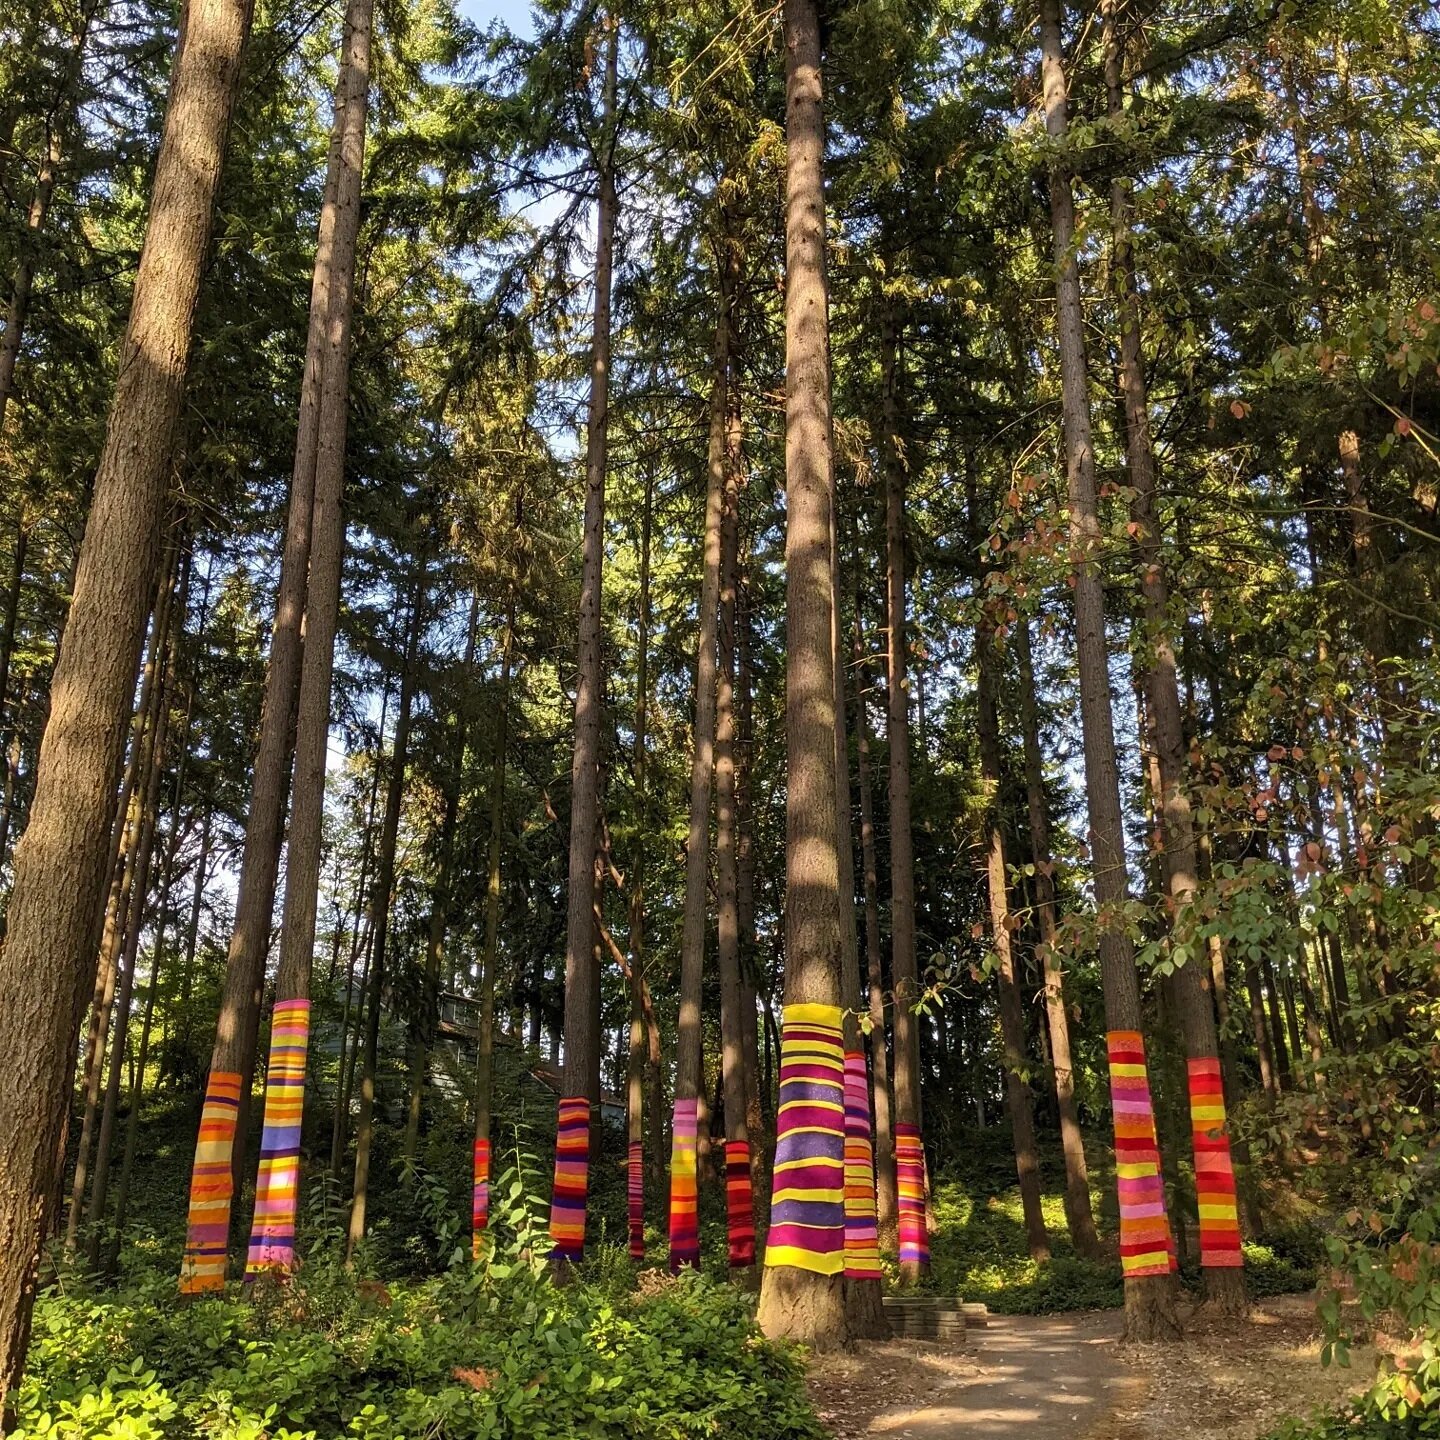 Came across this magical art installation/yarn bomb today at #dottieharperpark.  Thank you SO much fiber artist #suzannetidwell (and your helpers)! You have made so many people happy with your colorful trees! ❤️💛🧡💜💗

https://b-townblog.com/2021/0